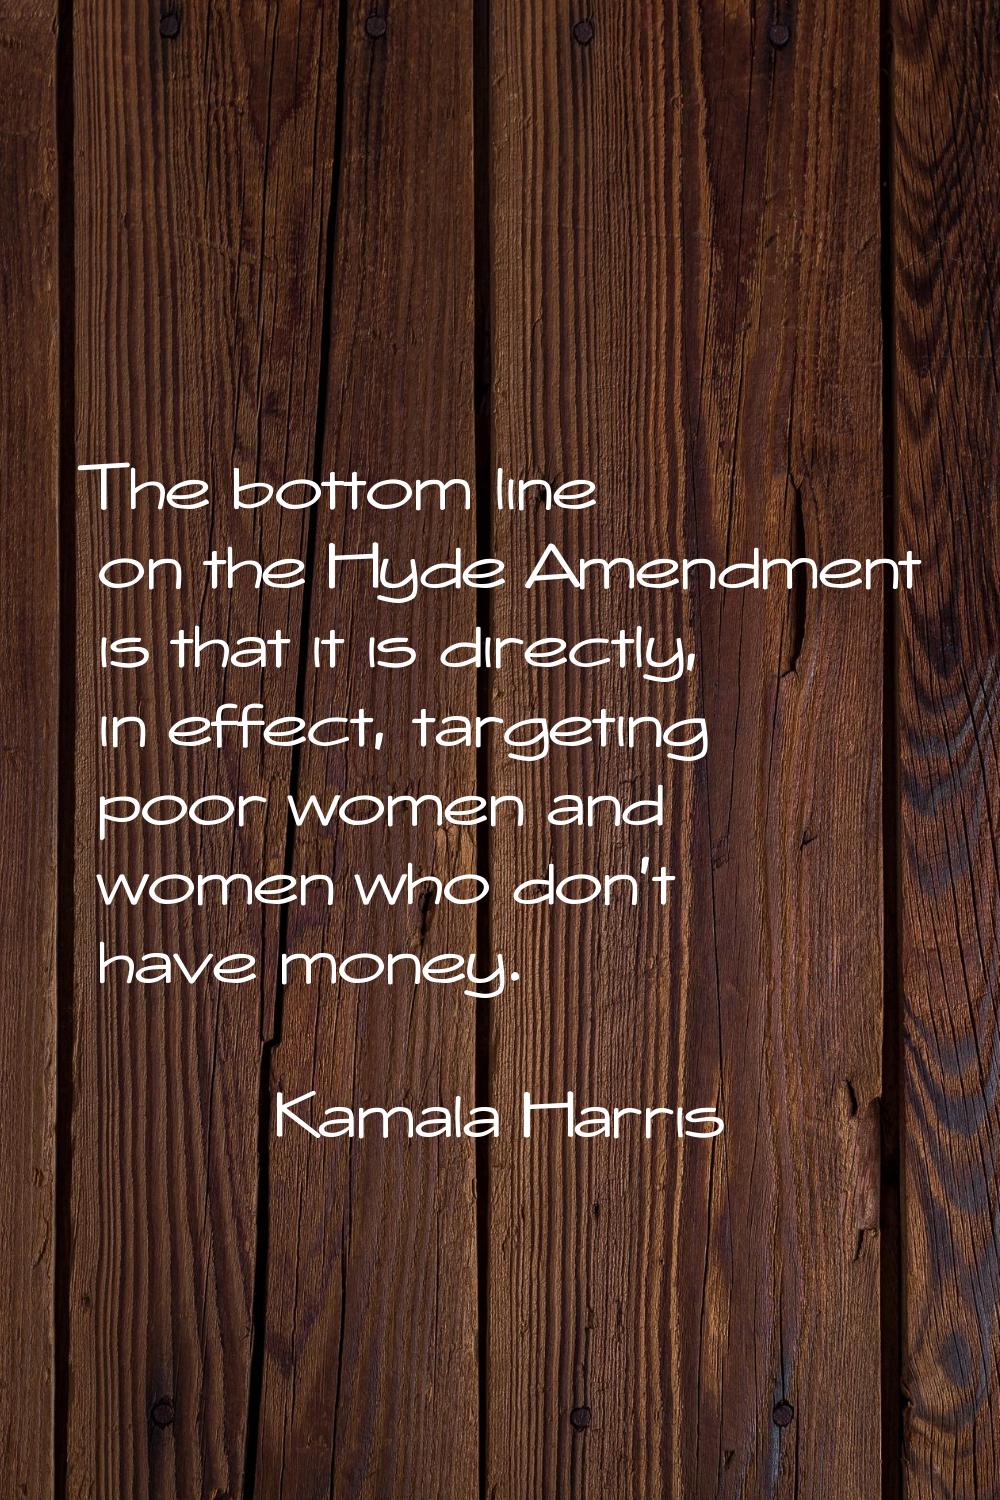 The bottom line on the Hyde Amendment is that it is directly, in effect, targeting poor women and w